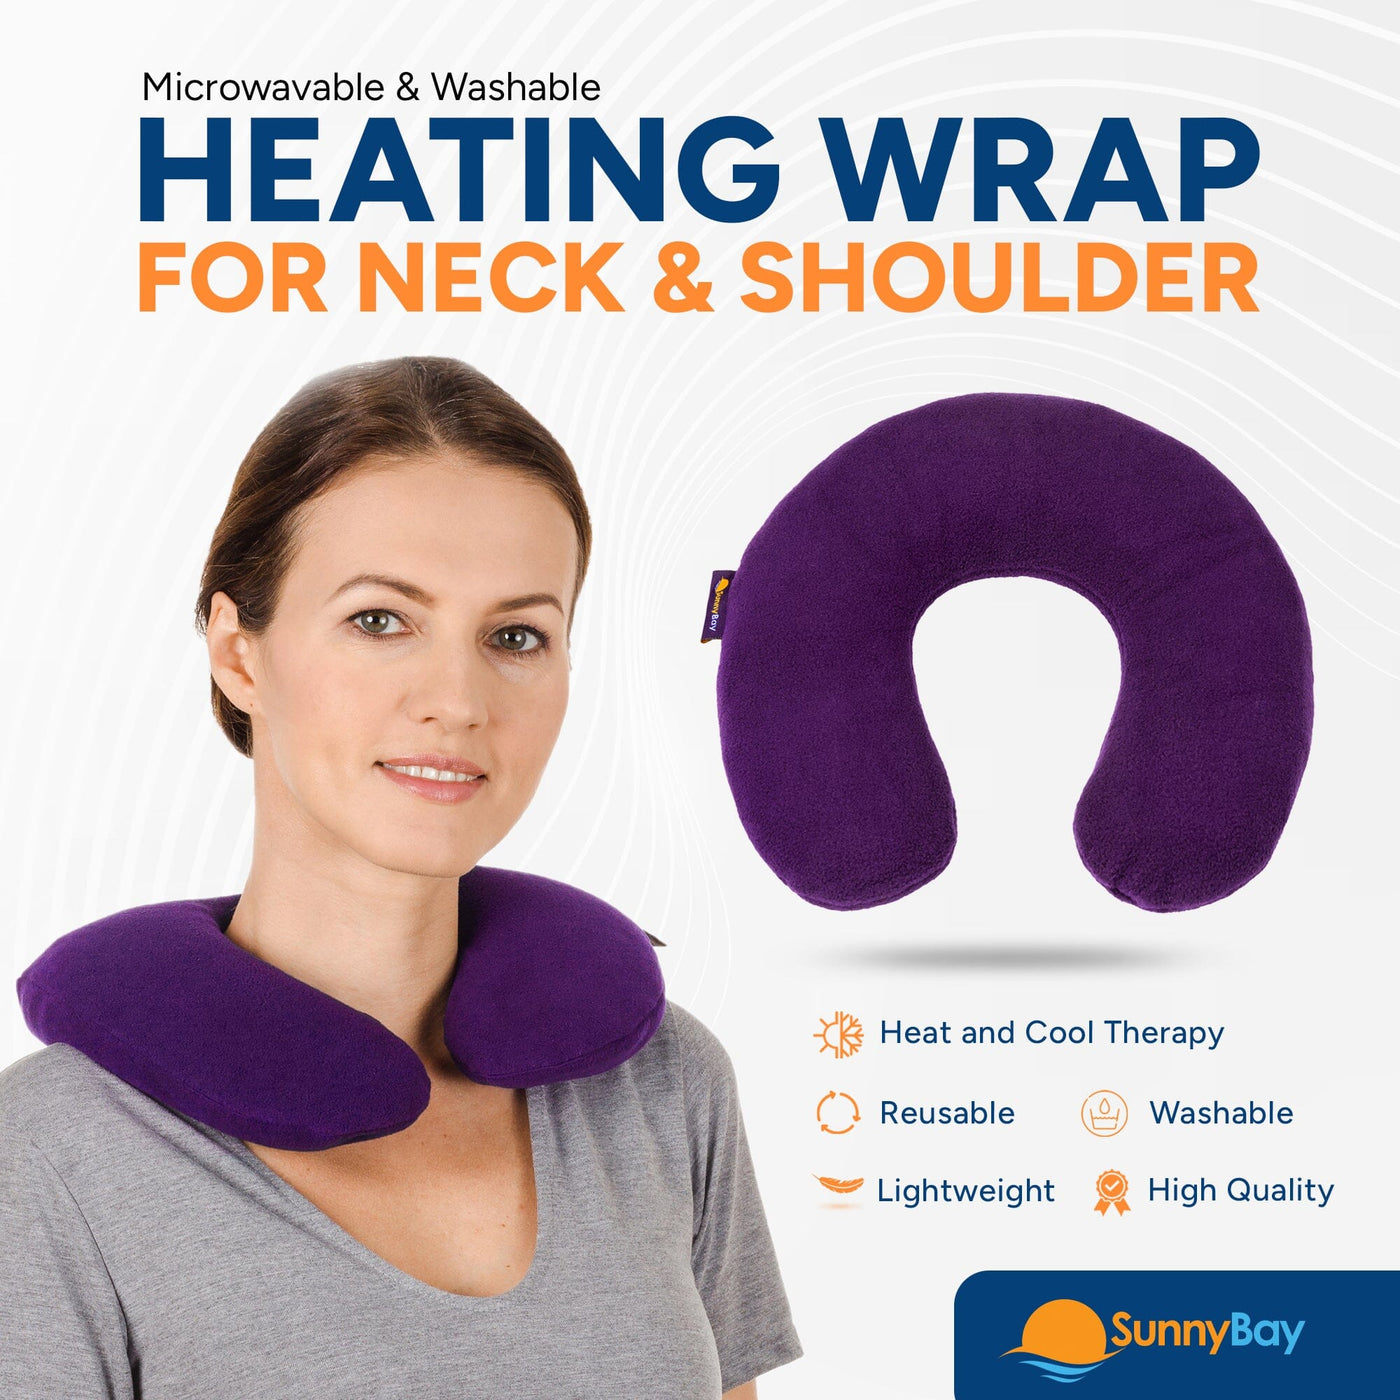 Microwavable Neck Heating Wrap, Washable Leopard Print-SunnyBay